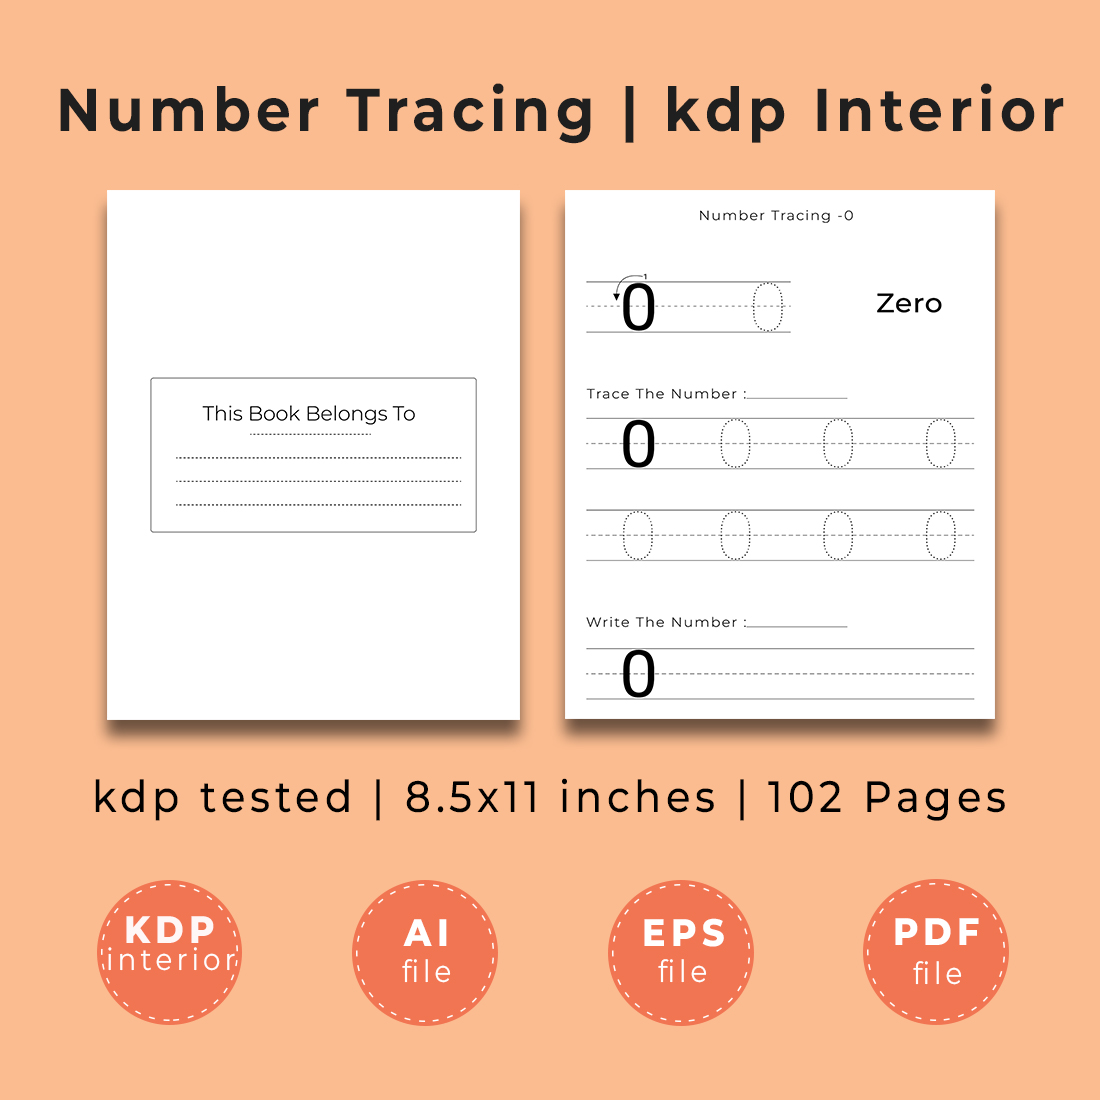 Number Tracing | Kdp Interior main cover.